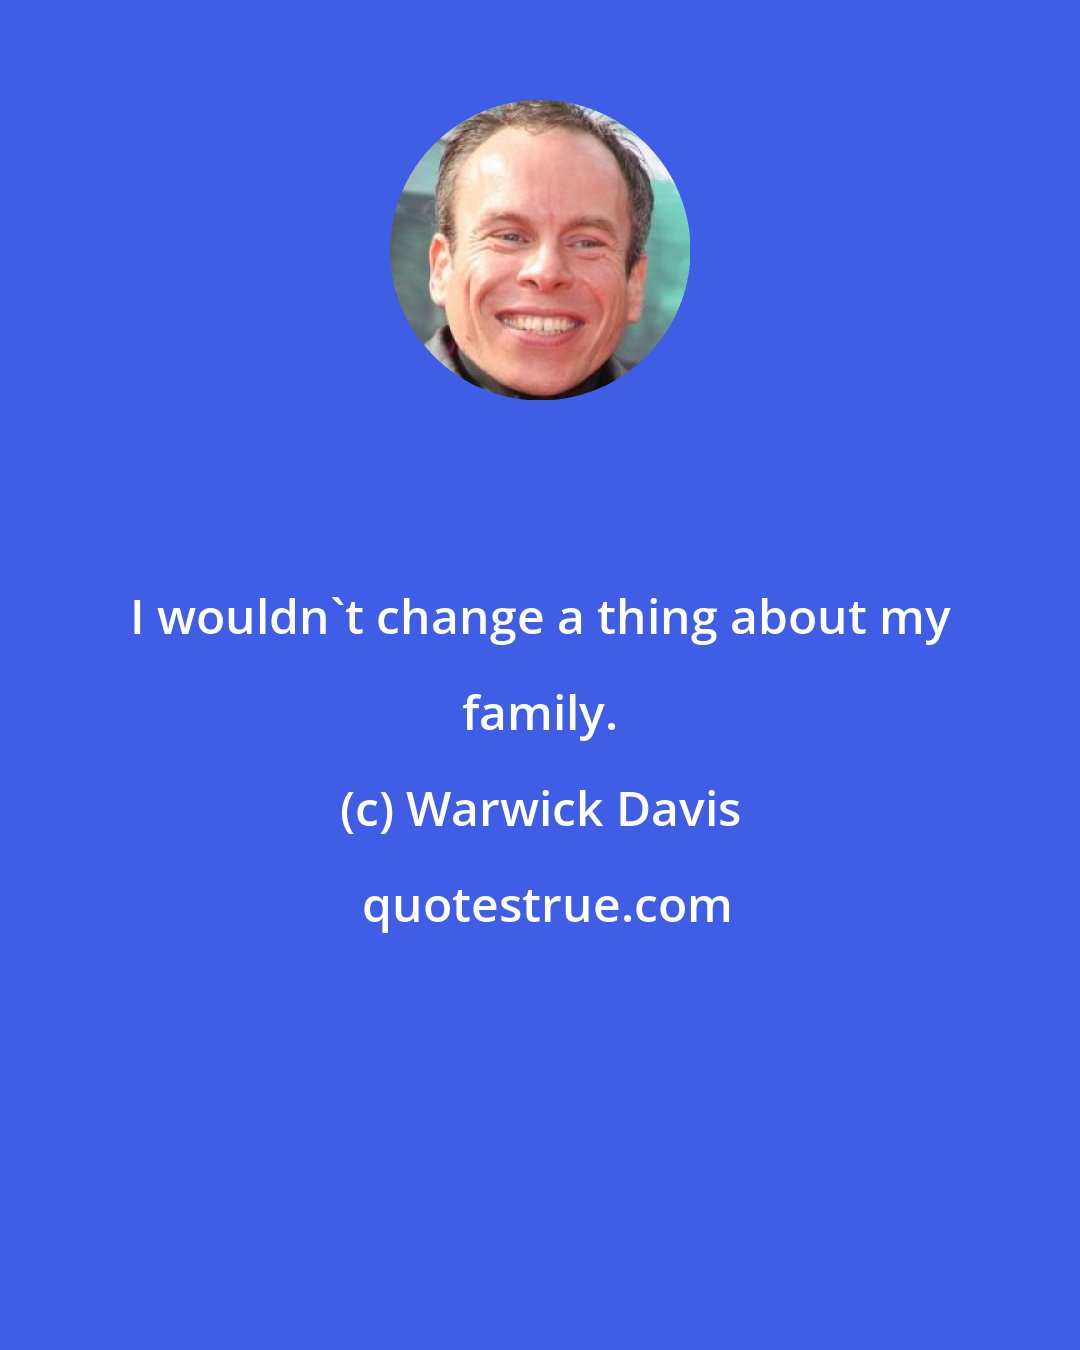 Warwick Davis: I wouldn't change a thing about my family.